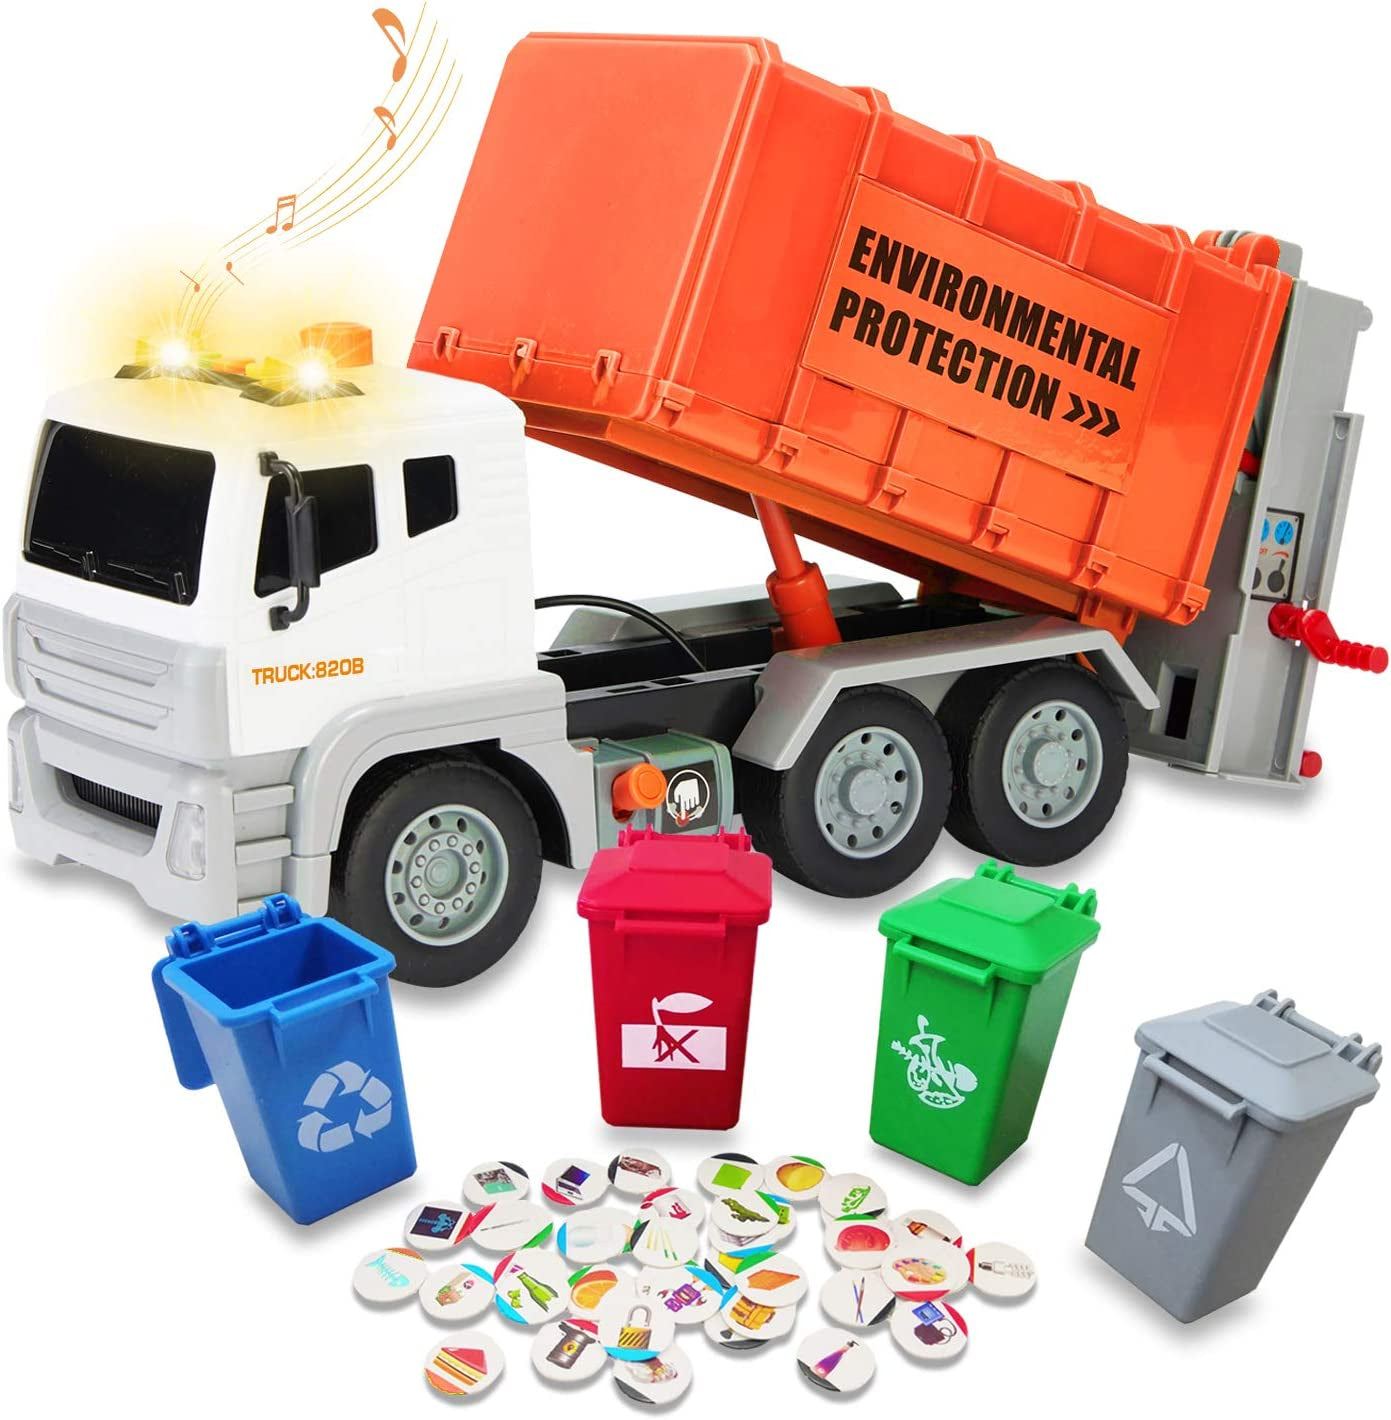 Garbage Truck Toy, Waste Management Recycling Truck Toy with 4 Trash Cans, 40 Garbage Sorting Cards, Lights & Sounds,Educational Toys and Gift for Toddlers, Kids, Boys & Girls (Green)